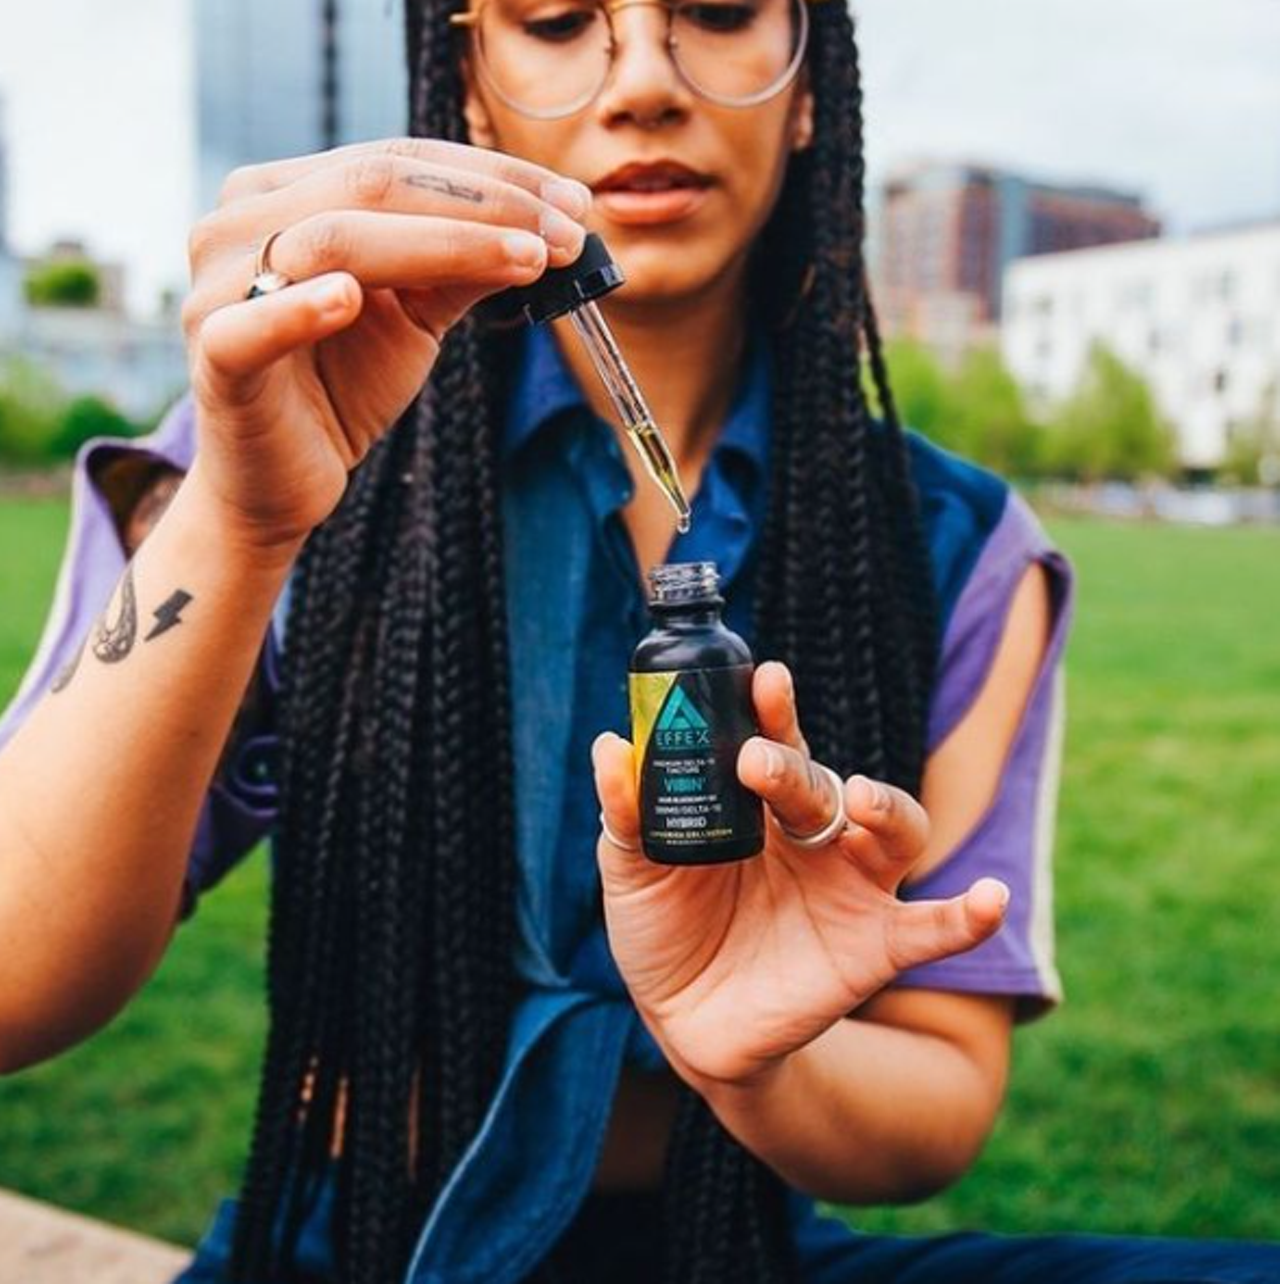 Gräs CBD
Multiple locations, grascbd.com
Based in Oregon, Gräs CBD brings its expertise in both the cannabis and CBD industries to its three San Antonio locations, providing CBD products for both adults and pets with wellness in mind.
Photo via Instagram / grascbd